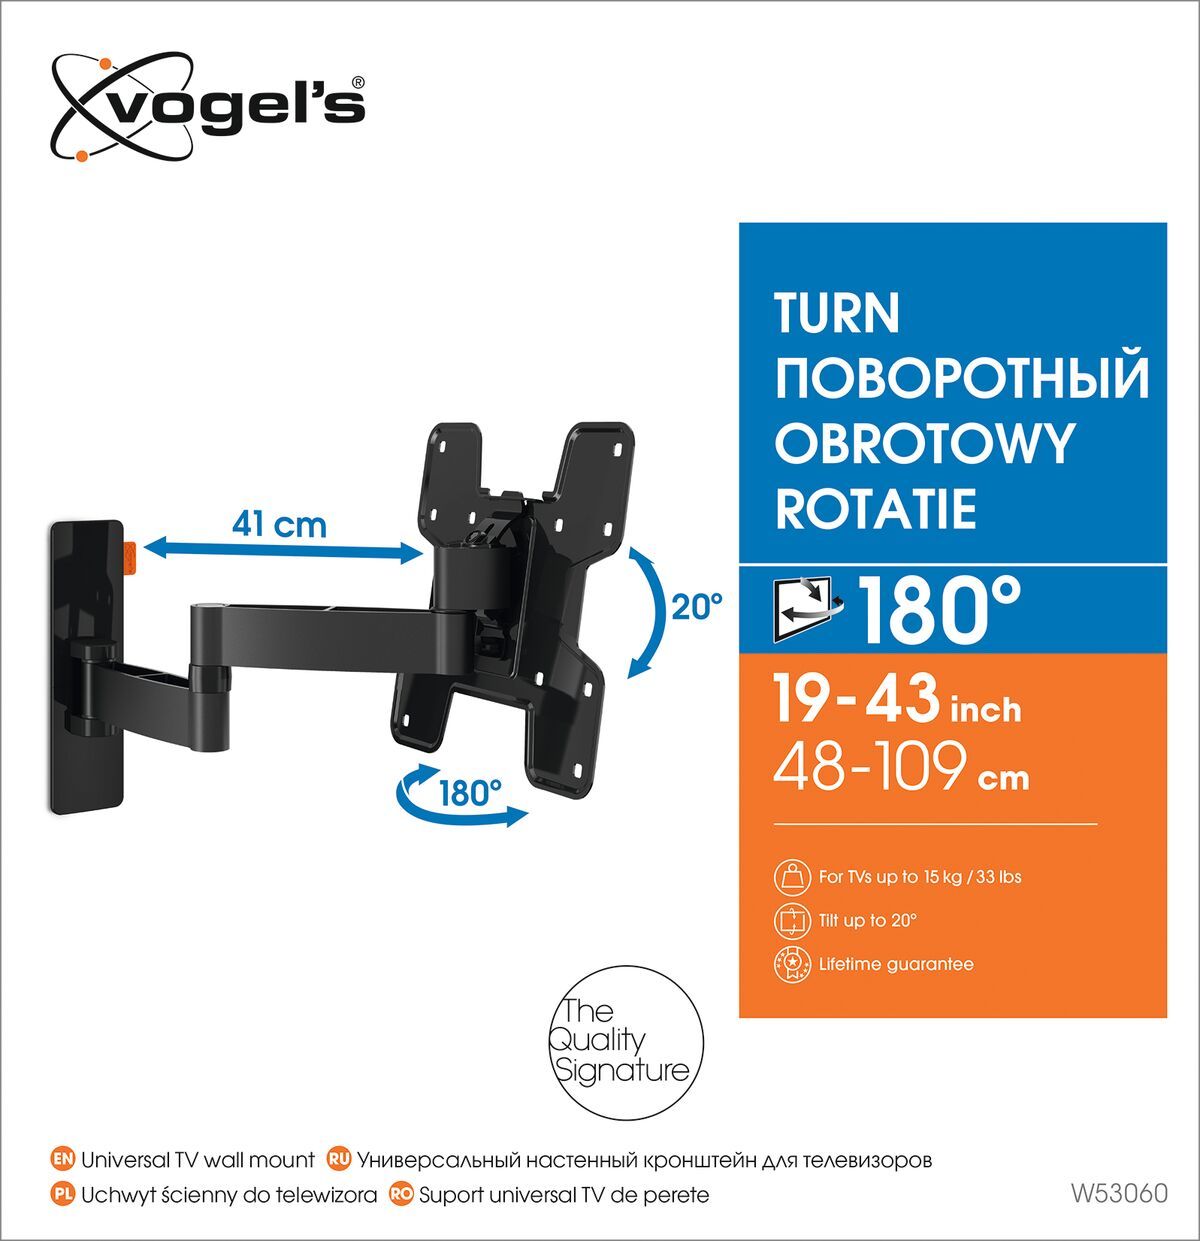 Vogel's W53060 Full-Motion TV Wall Mount (black) - Suitable for 19 up to 43 inch TVs - Full motion (up to 180°) - Tilt -10°/+10° - Packaging front